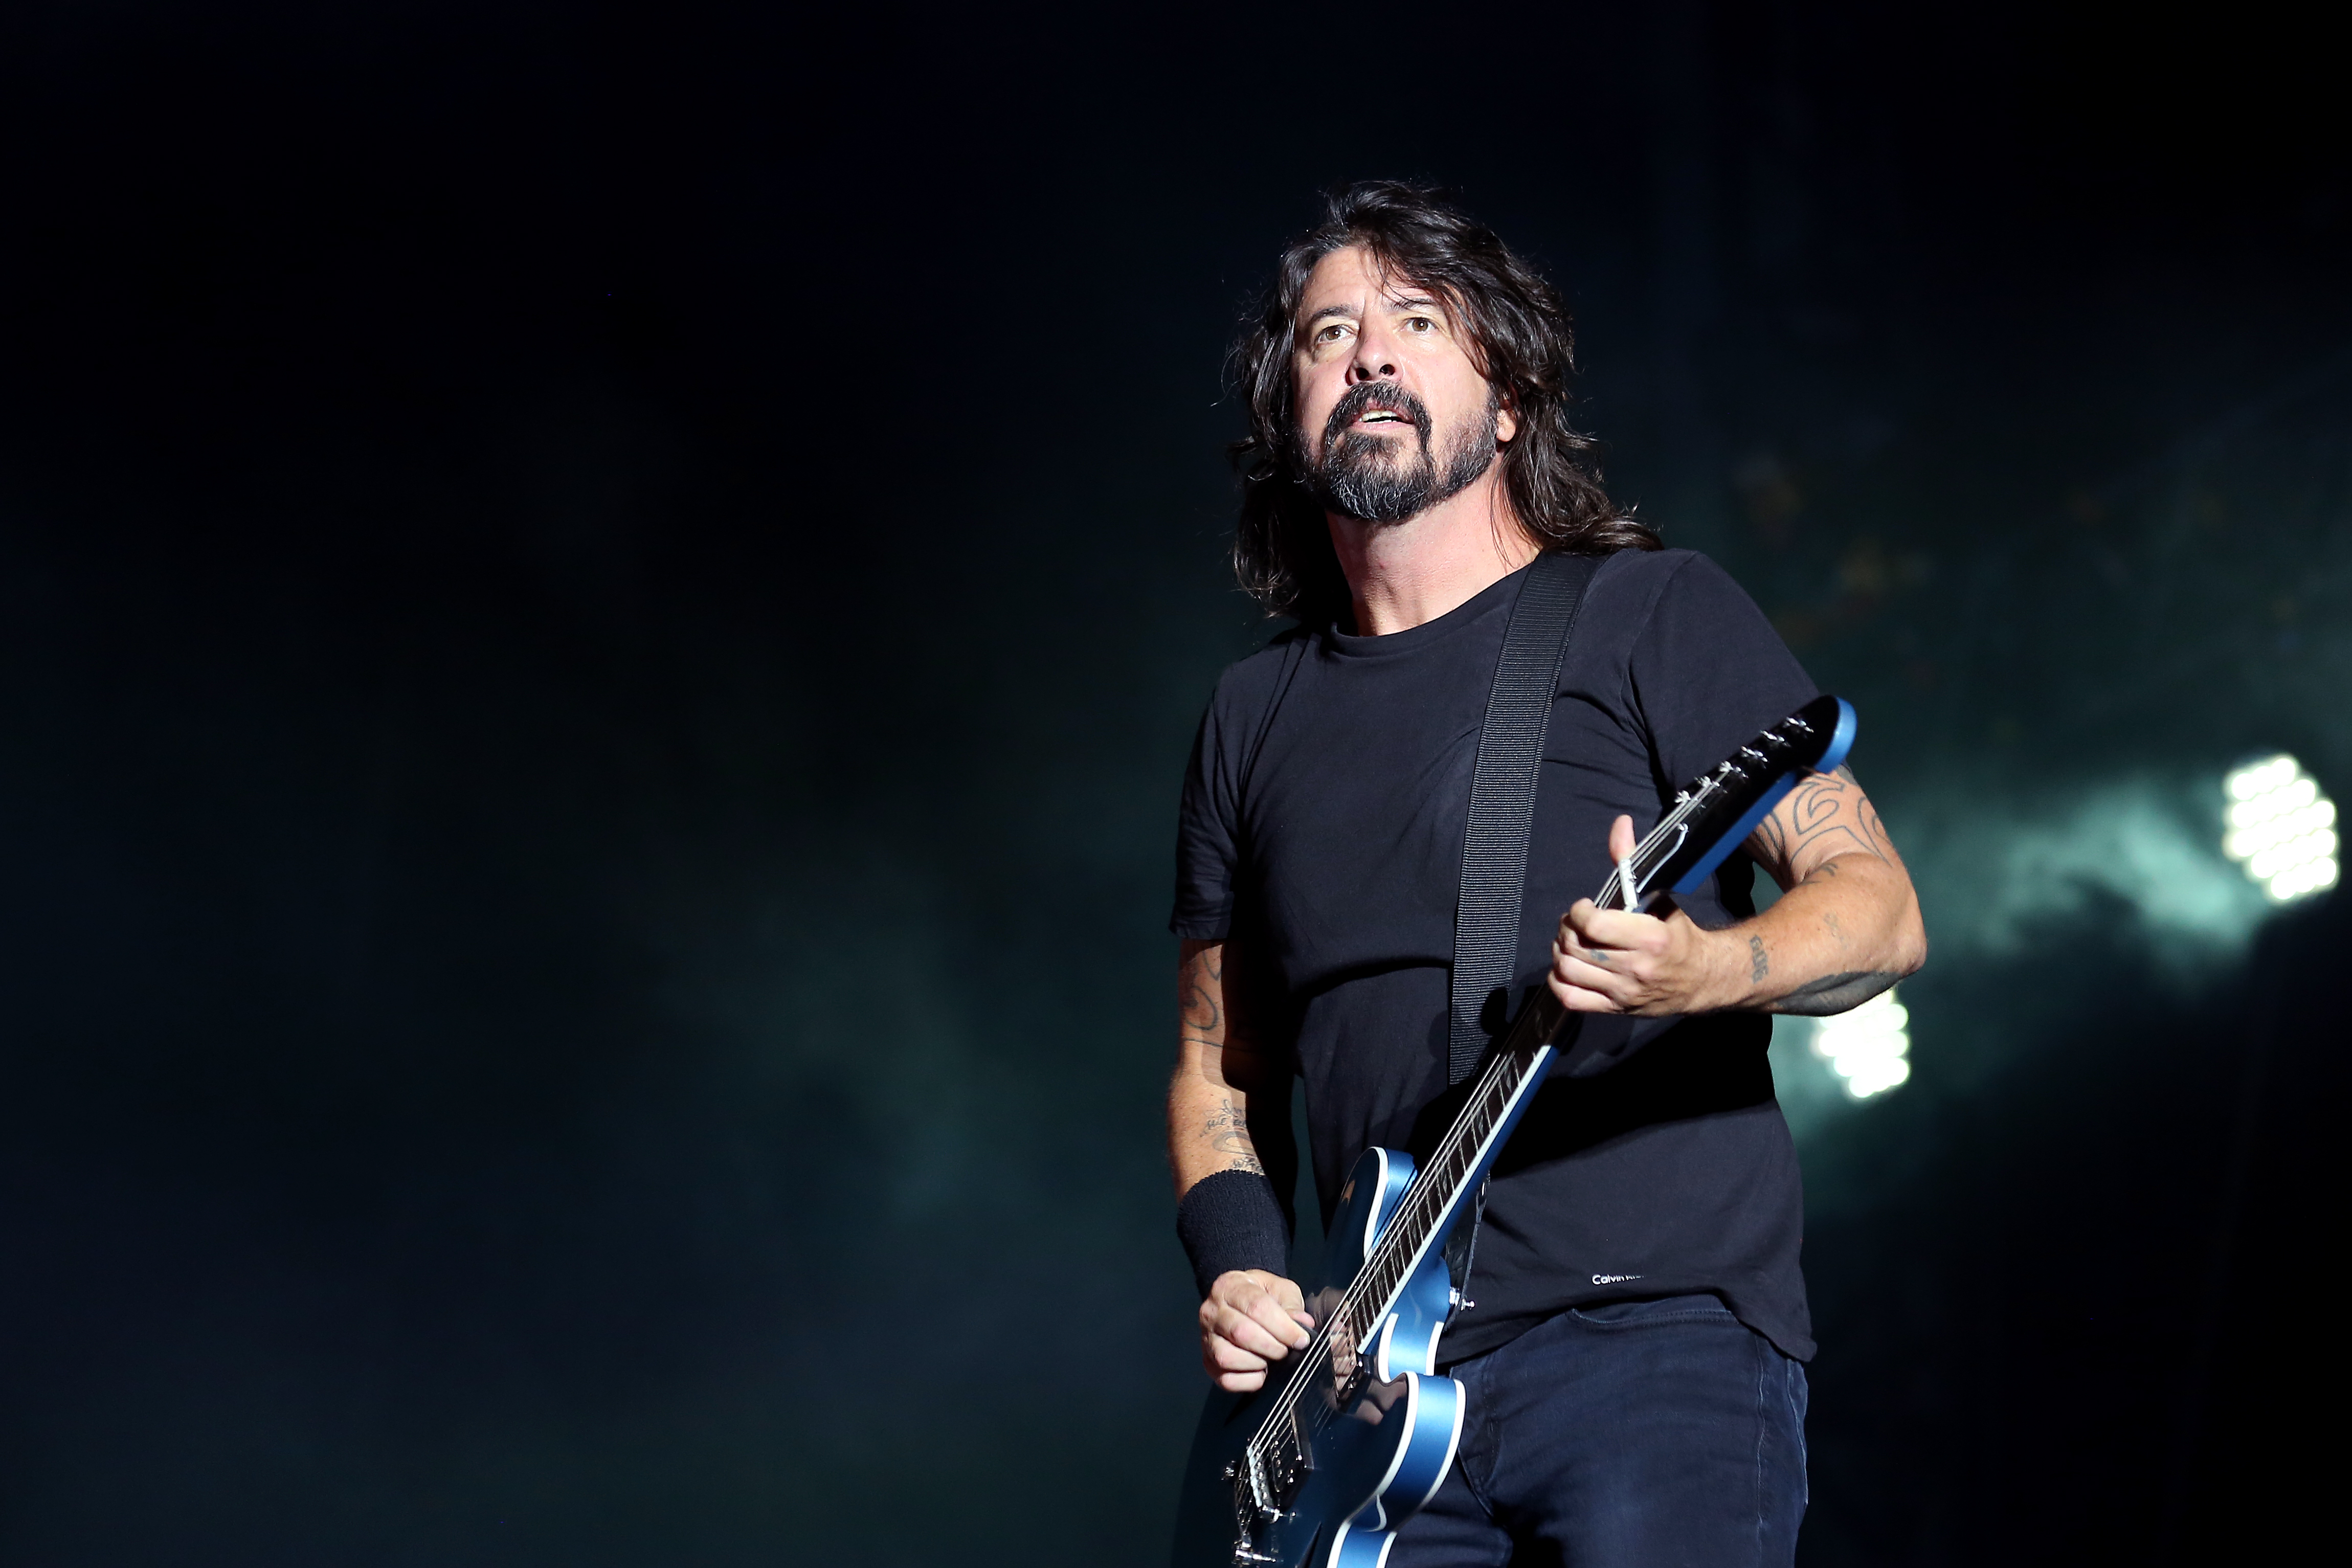 Dave Grohl mit den Foo Fighters am 25. August 2019 bei einem Auftritt in Dave Grohl mit den Foo Fighters am 25. August 2019 bei einem Auftritt in Reading, EnglandDave Grohl mit den Foo Fighters am 25. August 2019 bei einem Auftritt in Reading, EnglandReading, England